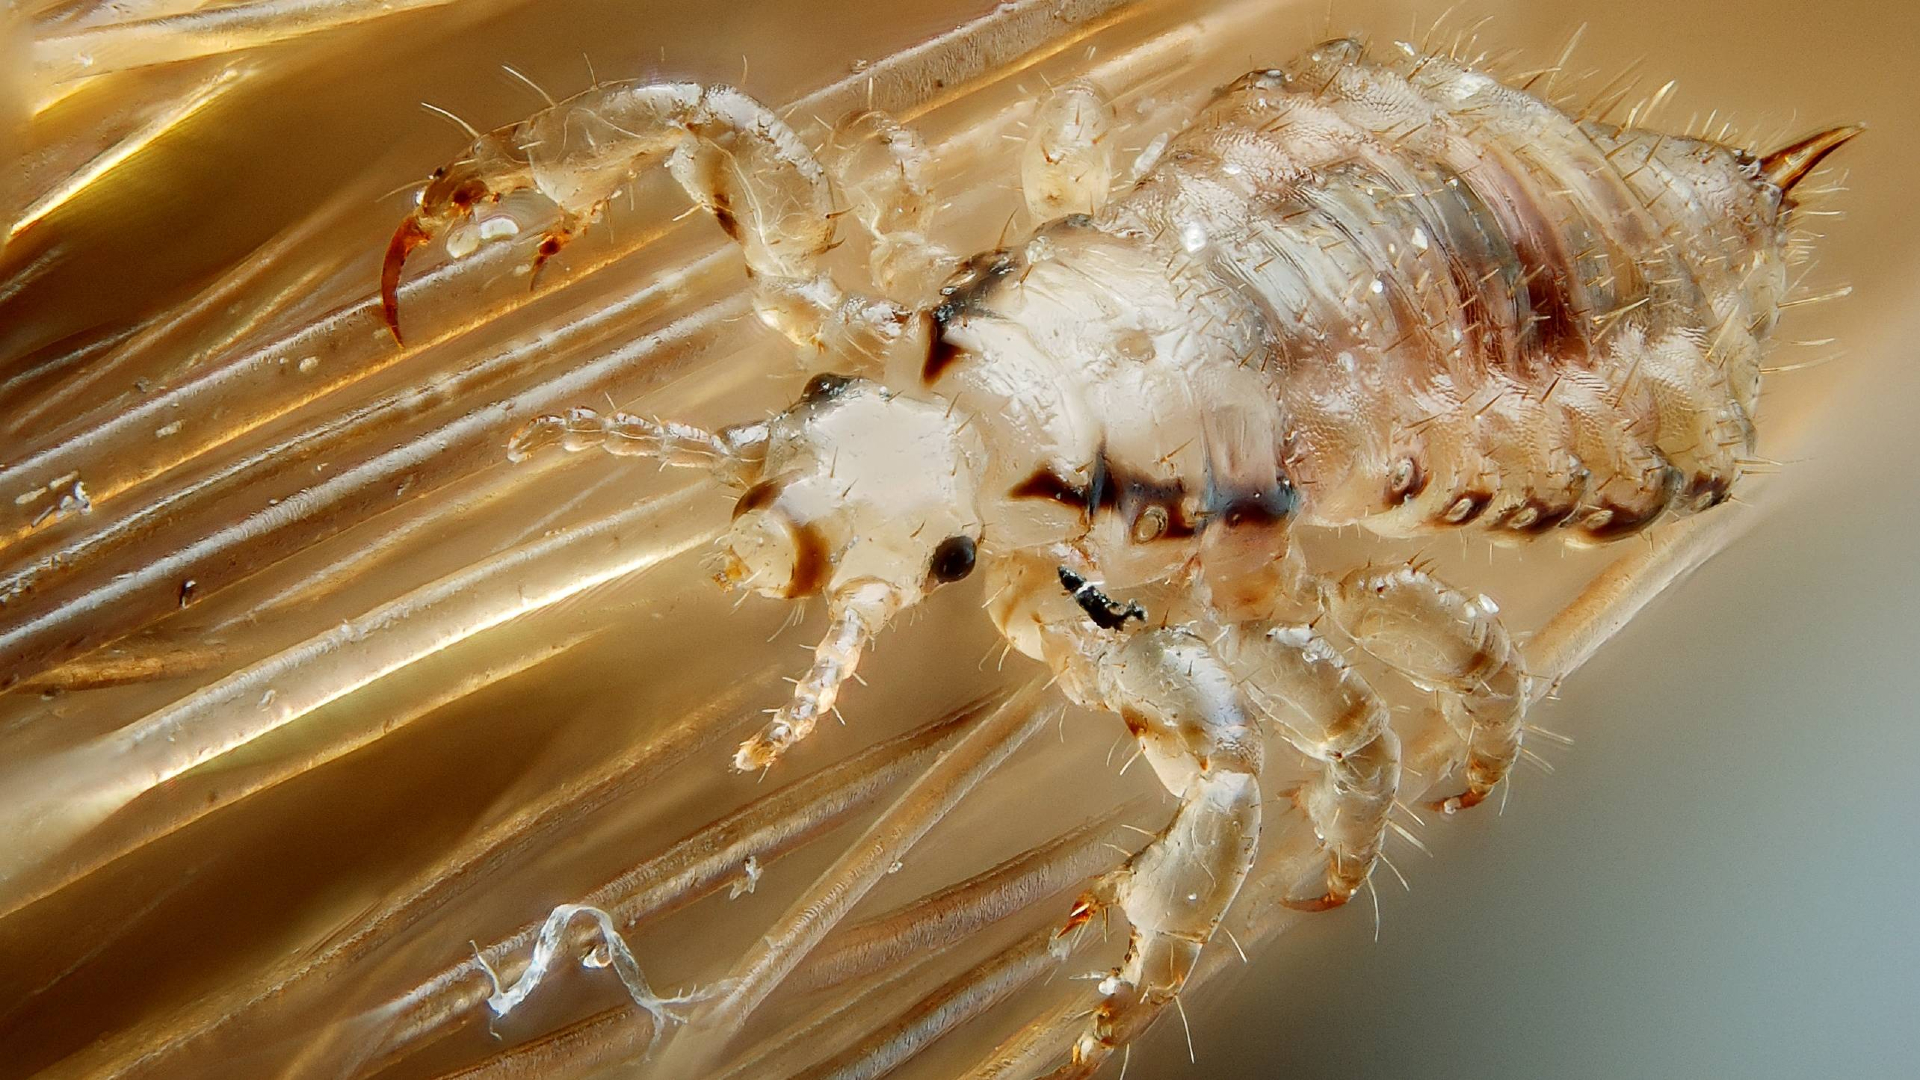 A photo of the parasitic insect that causes head lice.